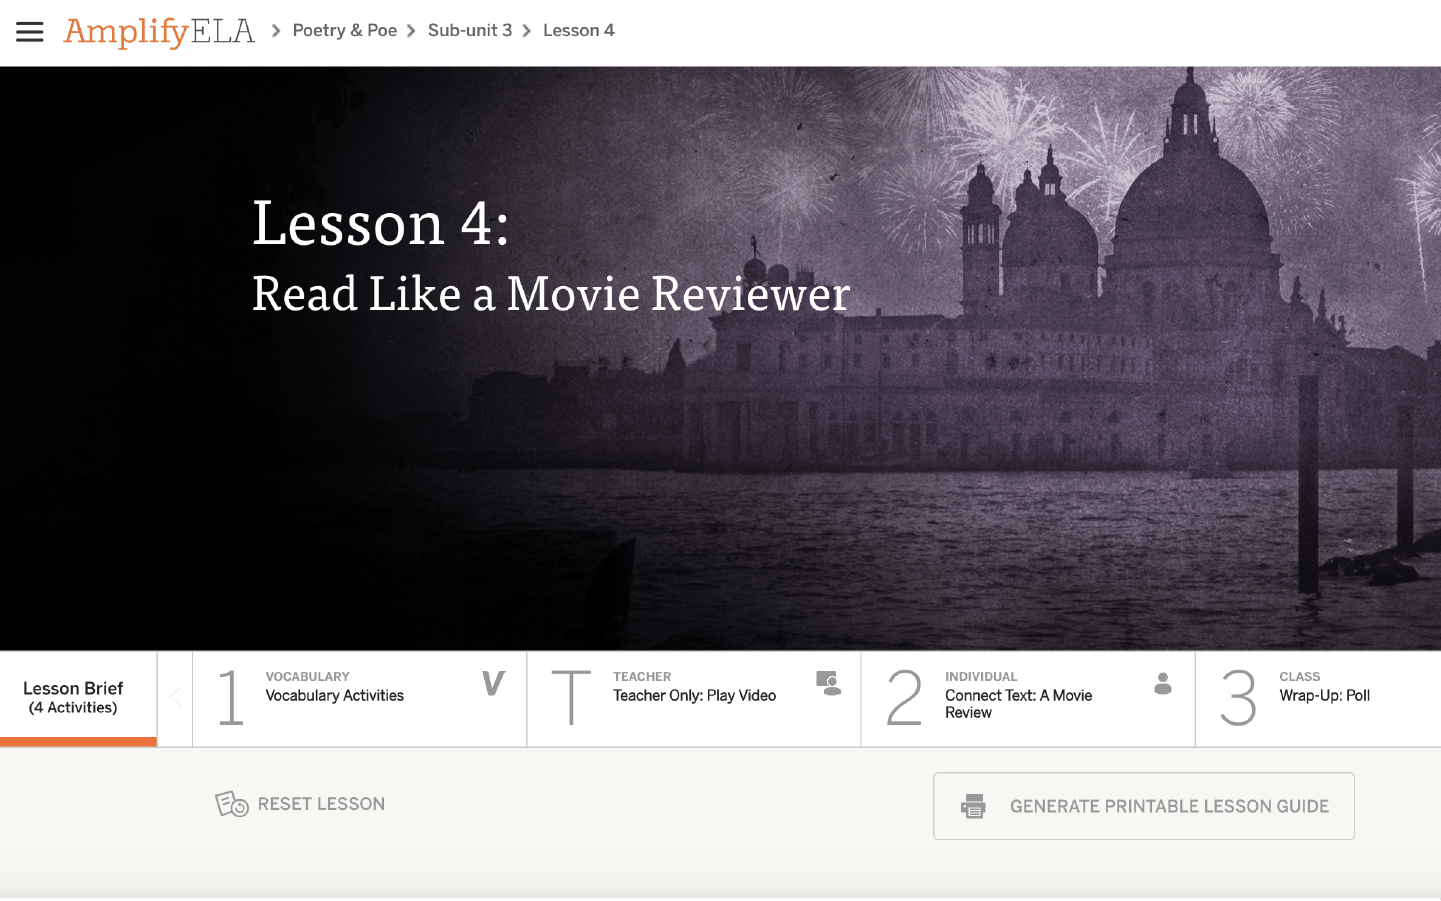 Amplify ELA's digital simulation from Poetry and Poe, Read Like a Movie Reviewer